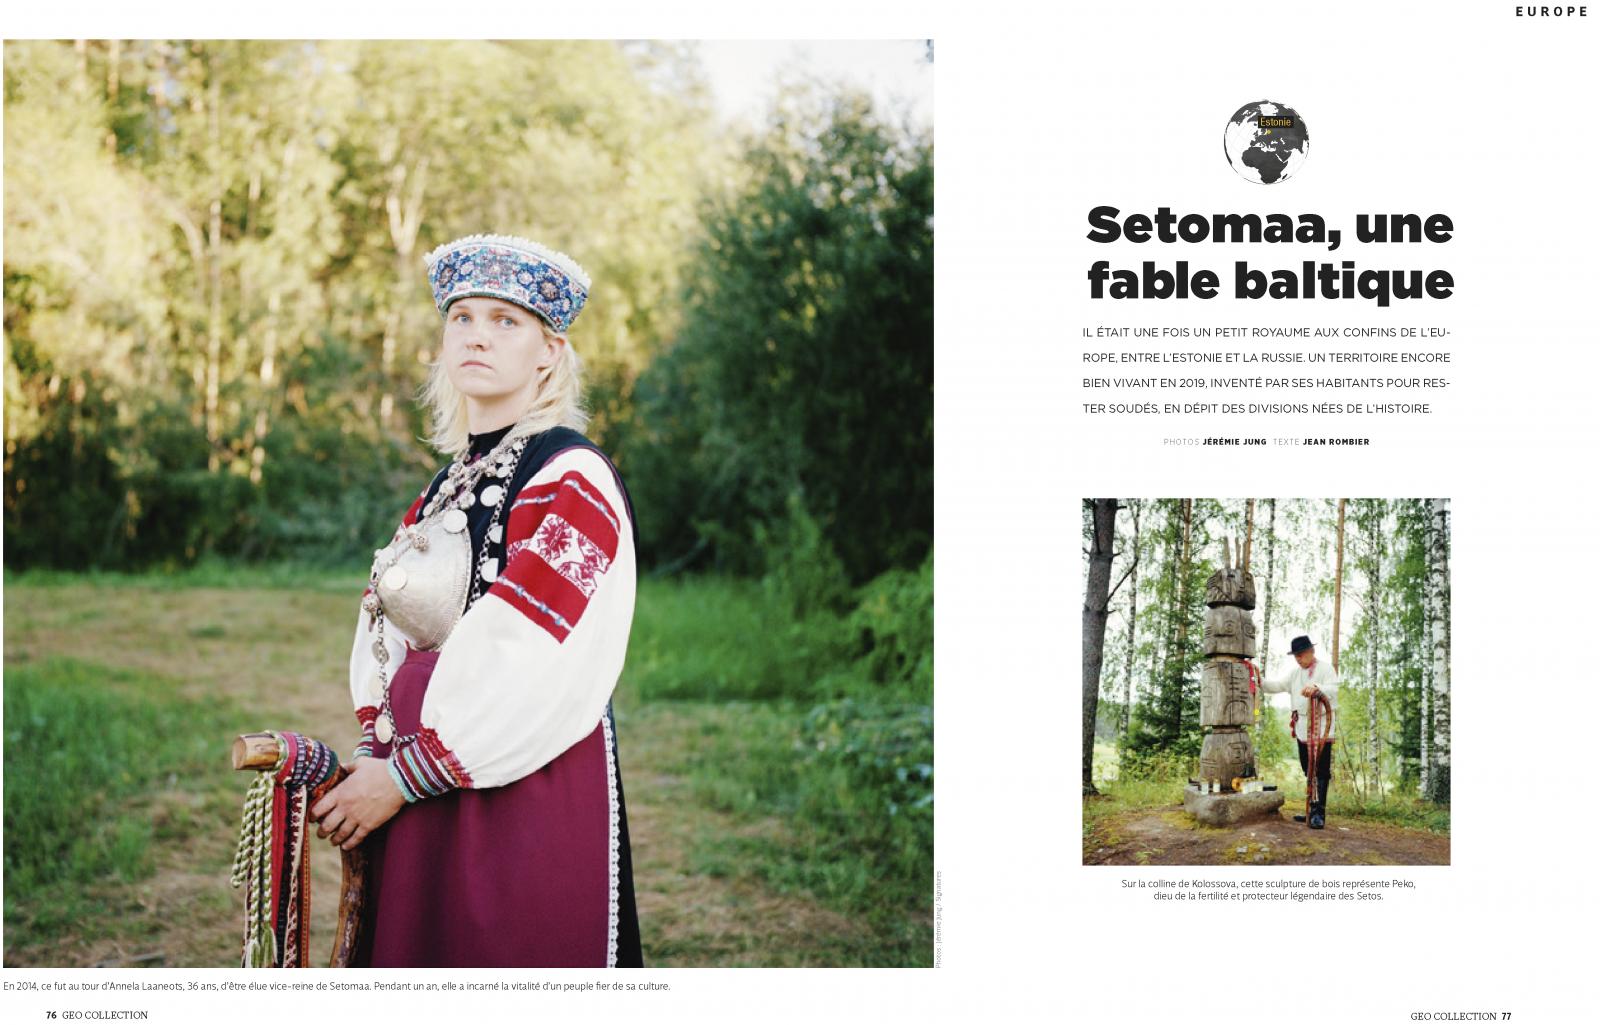 Setomaa published in GEO France